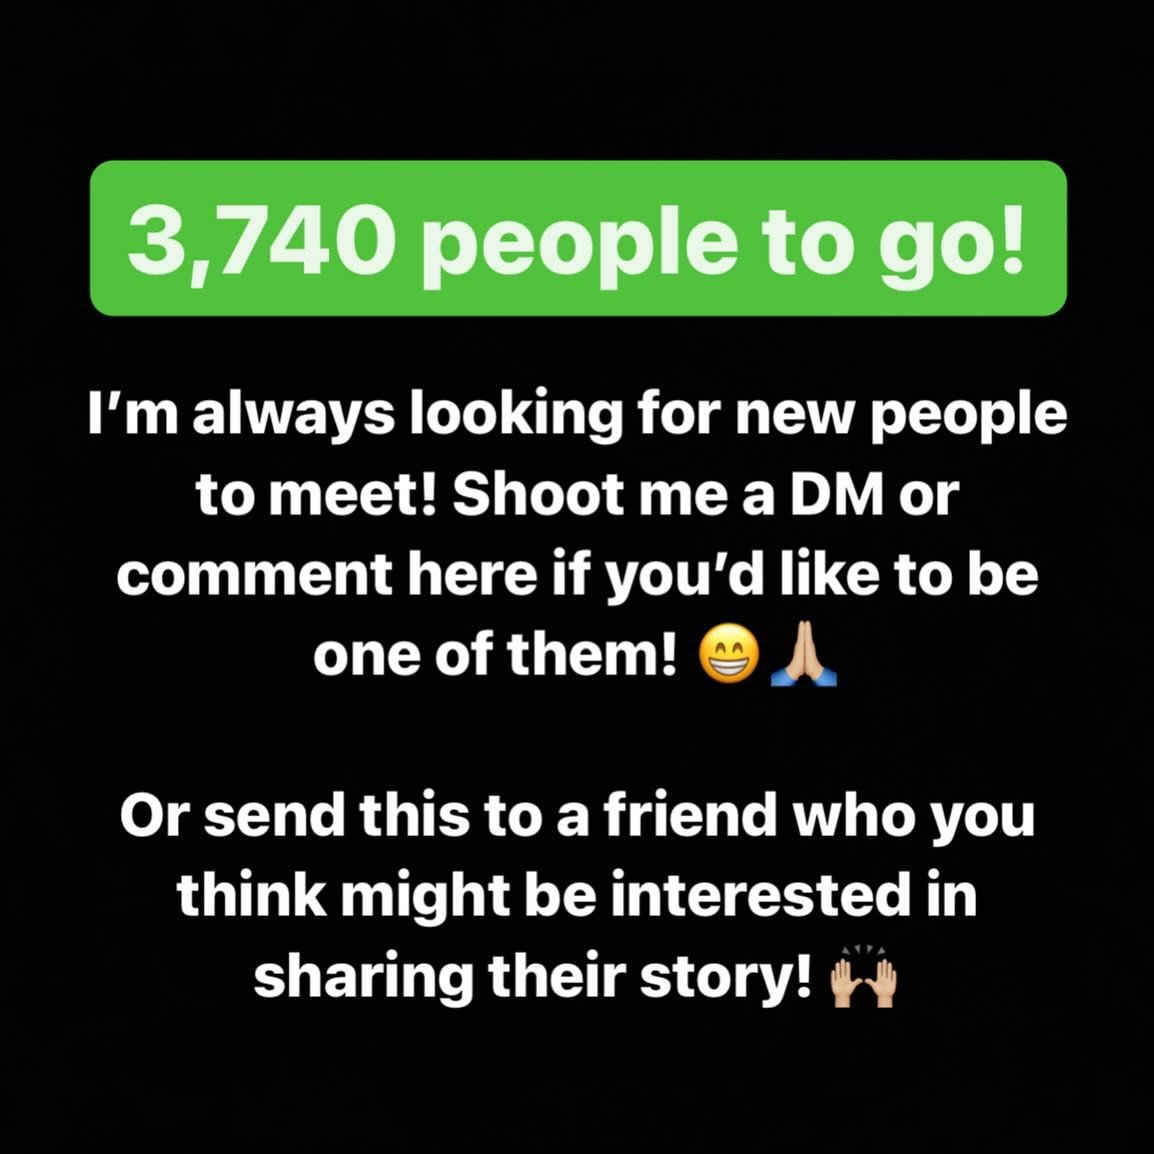 I&rsquo;m always looking for new people to meet! Shoot me a DM or comment here if you&rsquo;d like to be one of them! 😁🙏🏼
&bull;
Or send this to a friend who you think might be interested in sharing their story! 🙌🏼
&bull;
#connection #conversati